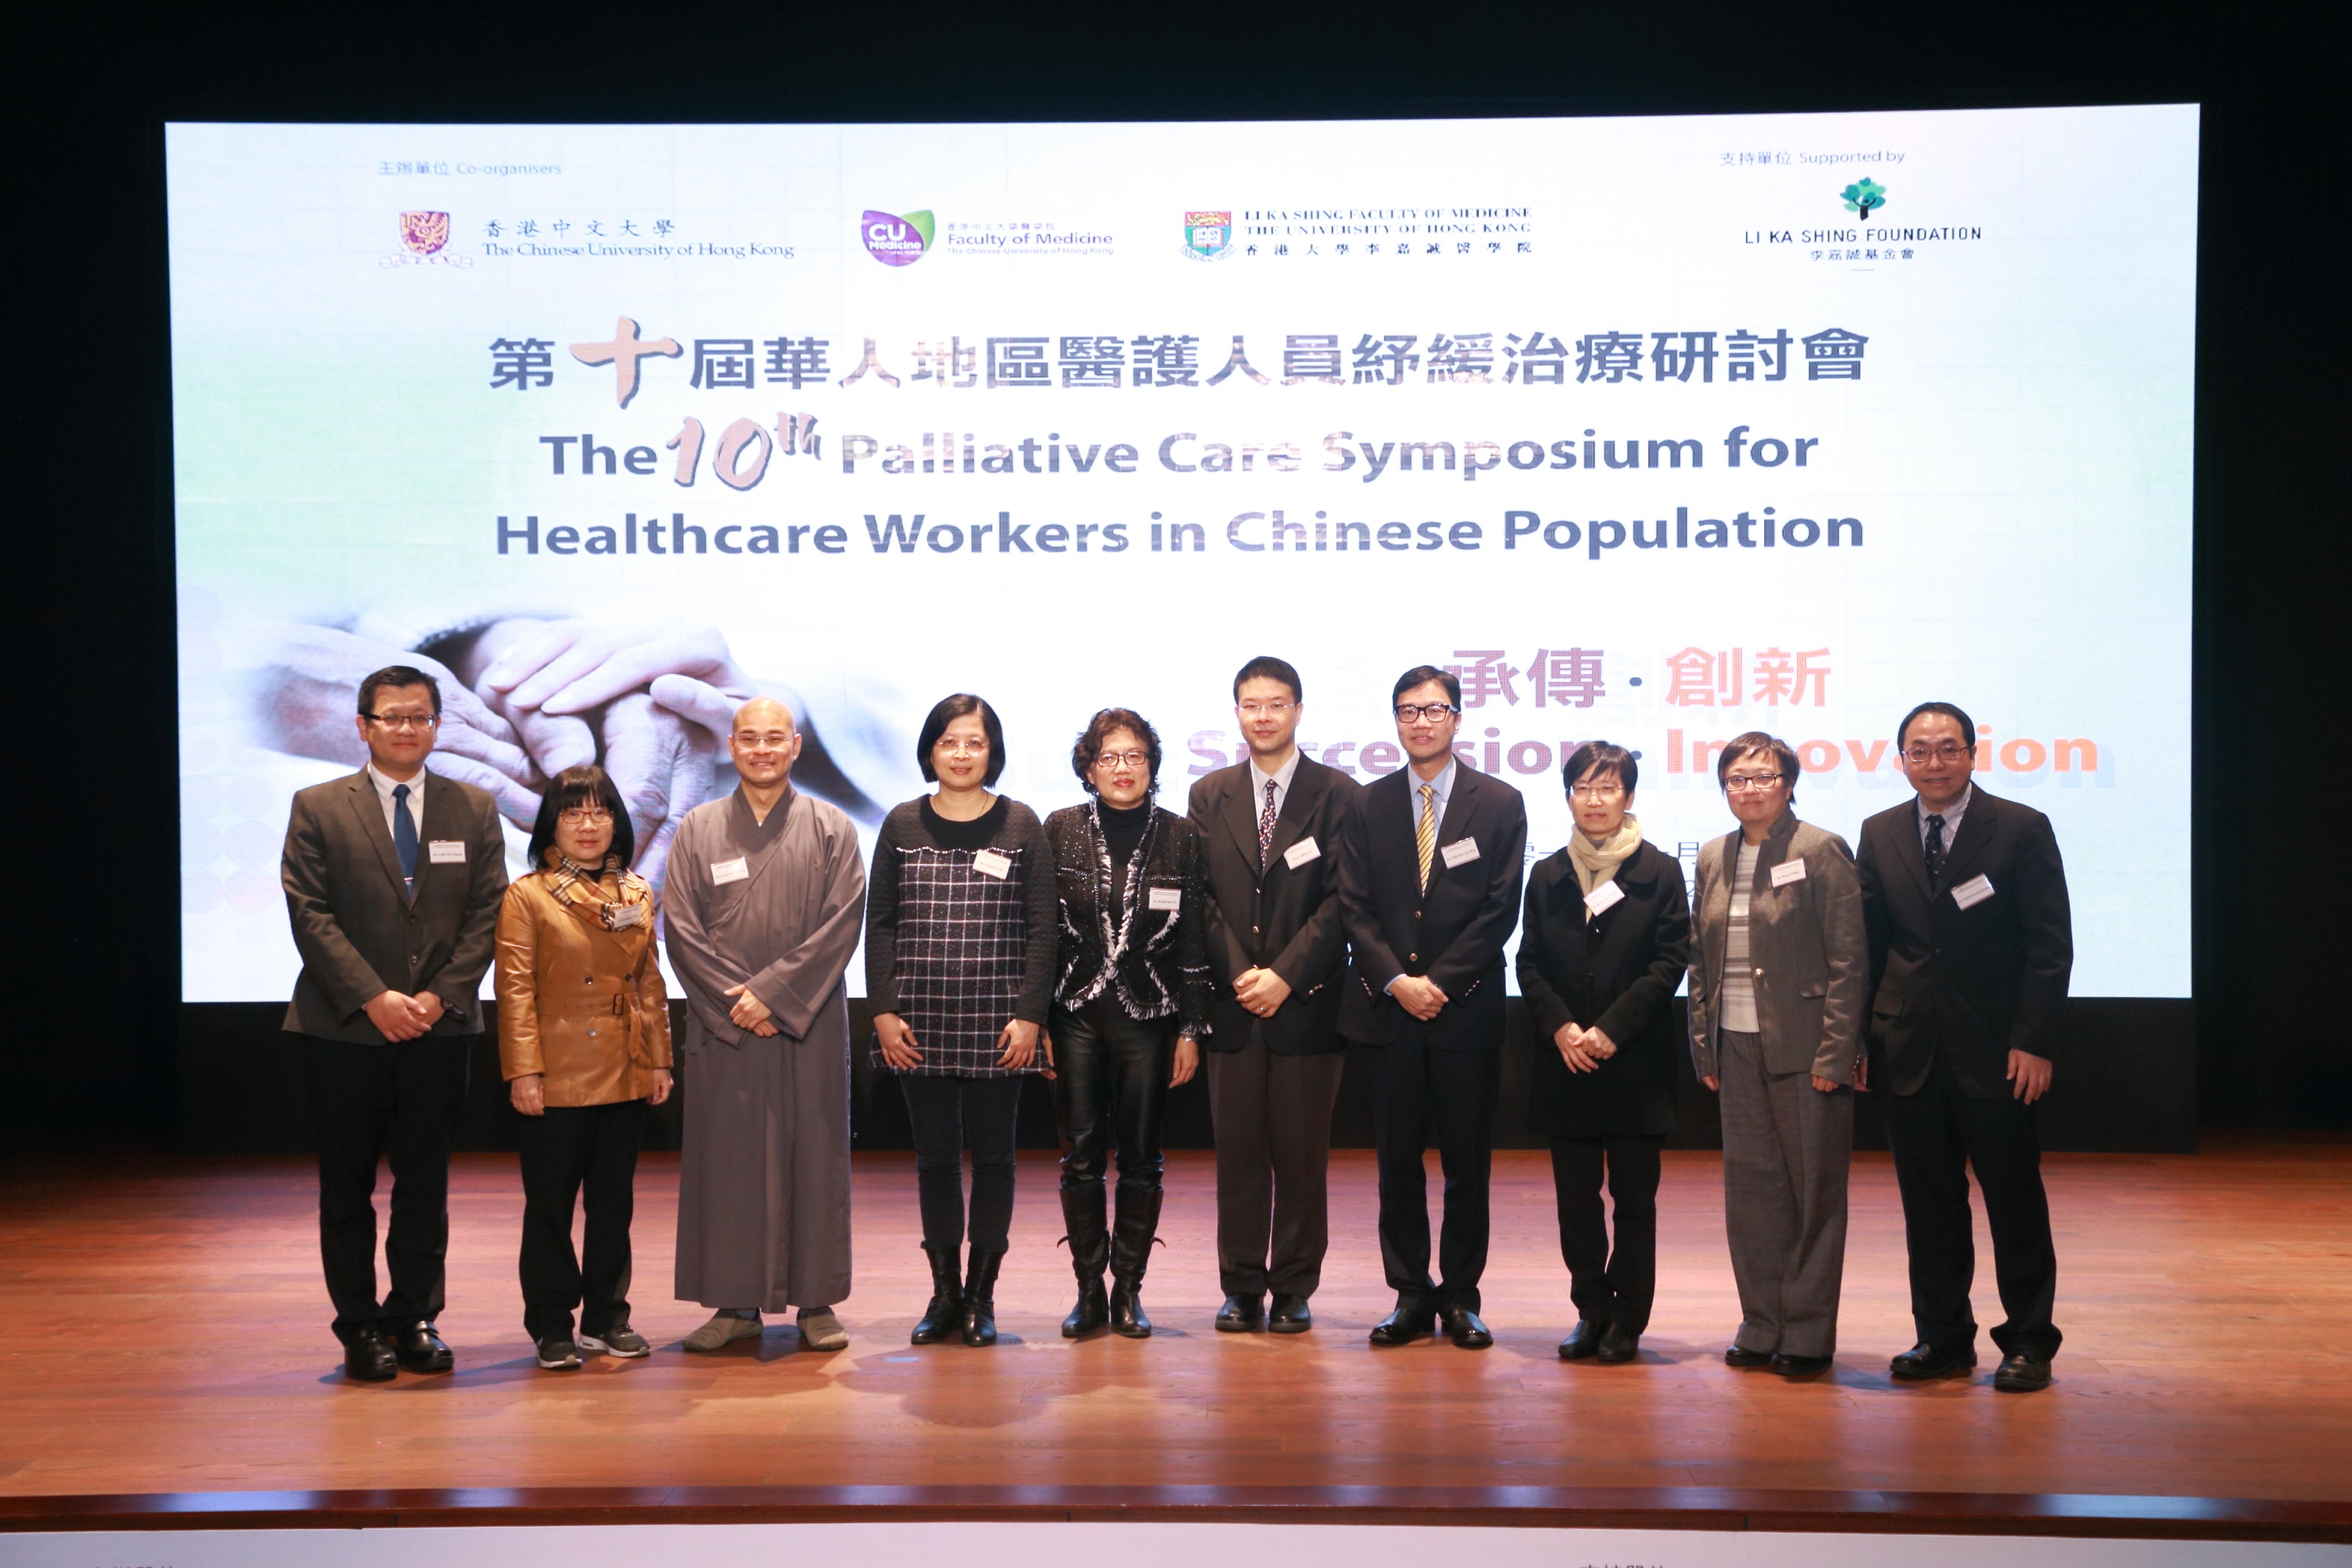  Over 180 local healthcare professionals attend the 10th Palliative Care Symposium for Healthcare Workers in Chinese Population, including Dr Katherine LO, Senior Project Manager of the Li Ka Shing Foundation (5th from left); Prof. Albert Martin LI, Assistant Dean (Education) of the Faculty of Medicine at CUHK (5th from right); Dr. Chi Wai CHEUNG, Assistant Dean (Private Sector Liaison) of the Li Ka Shing Faculty of Medicine at HKU (4th from right); the Venerable Shi Tian Wen, Master Lecturer of Tsz Shan Monastery (3rd from left); Dr. Tai Chung LAM, Clinical Assistant Professor of the Department of Clinical Oncology of the Li Ka Shing Faculty of Medicine at HKU (1st from left); Dr. Rebecca YEUNG, Chief of Service of the Department of Clinical Oncology of the Pamela Youde Nethersole Eastern Hospital (3rd from right); and Dr. Jennifer YIM, Centre-in-charge of Tsz Shan Monastery Spiritual Counselling Centre (2nd from left).